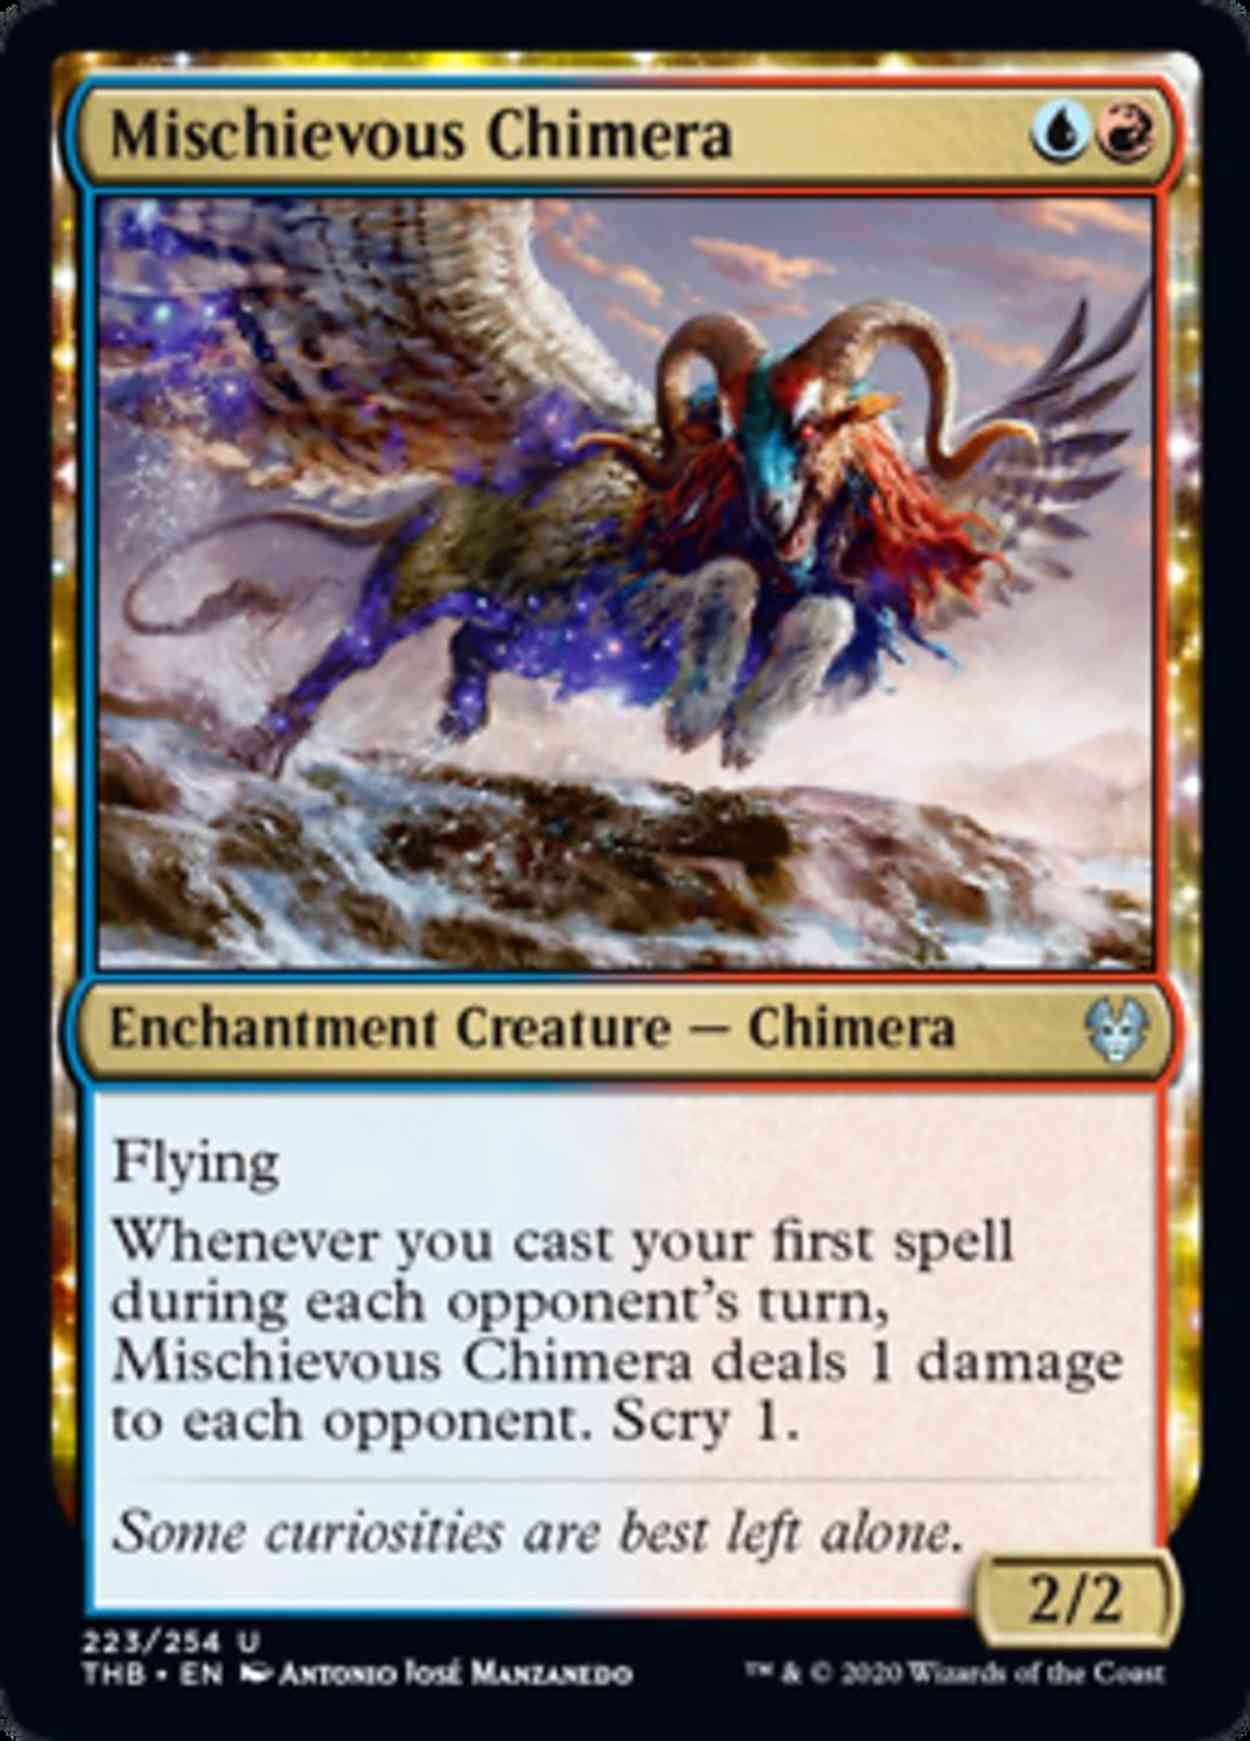 Mischievous Chimera magic card front